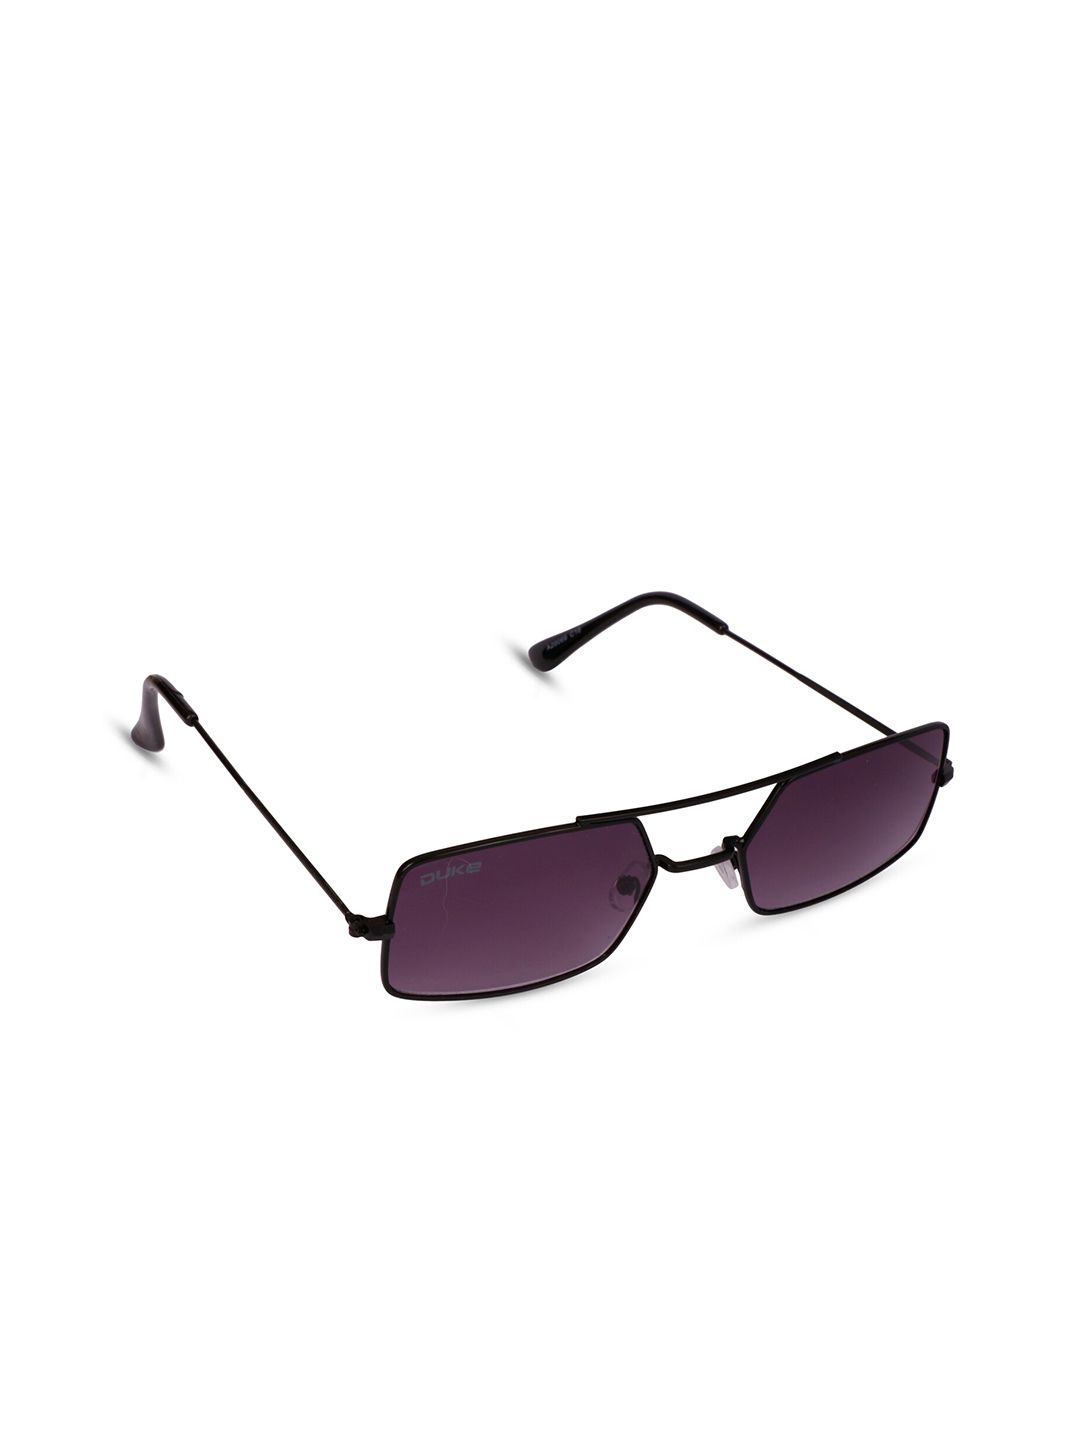 Duke Unisex Purple Lens & Black Rectangle Sunglasses with UV Protected Lens A20069-C10 Price in India